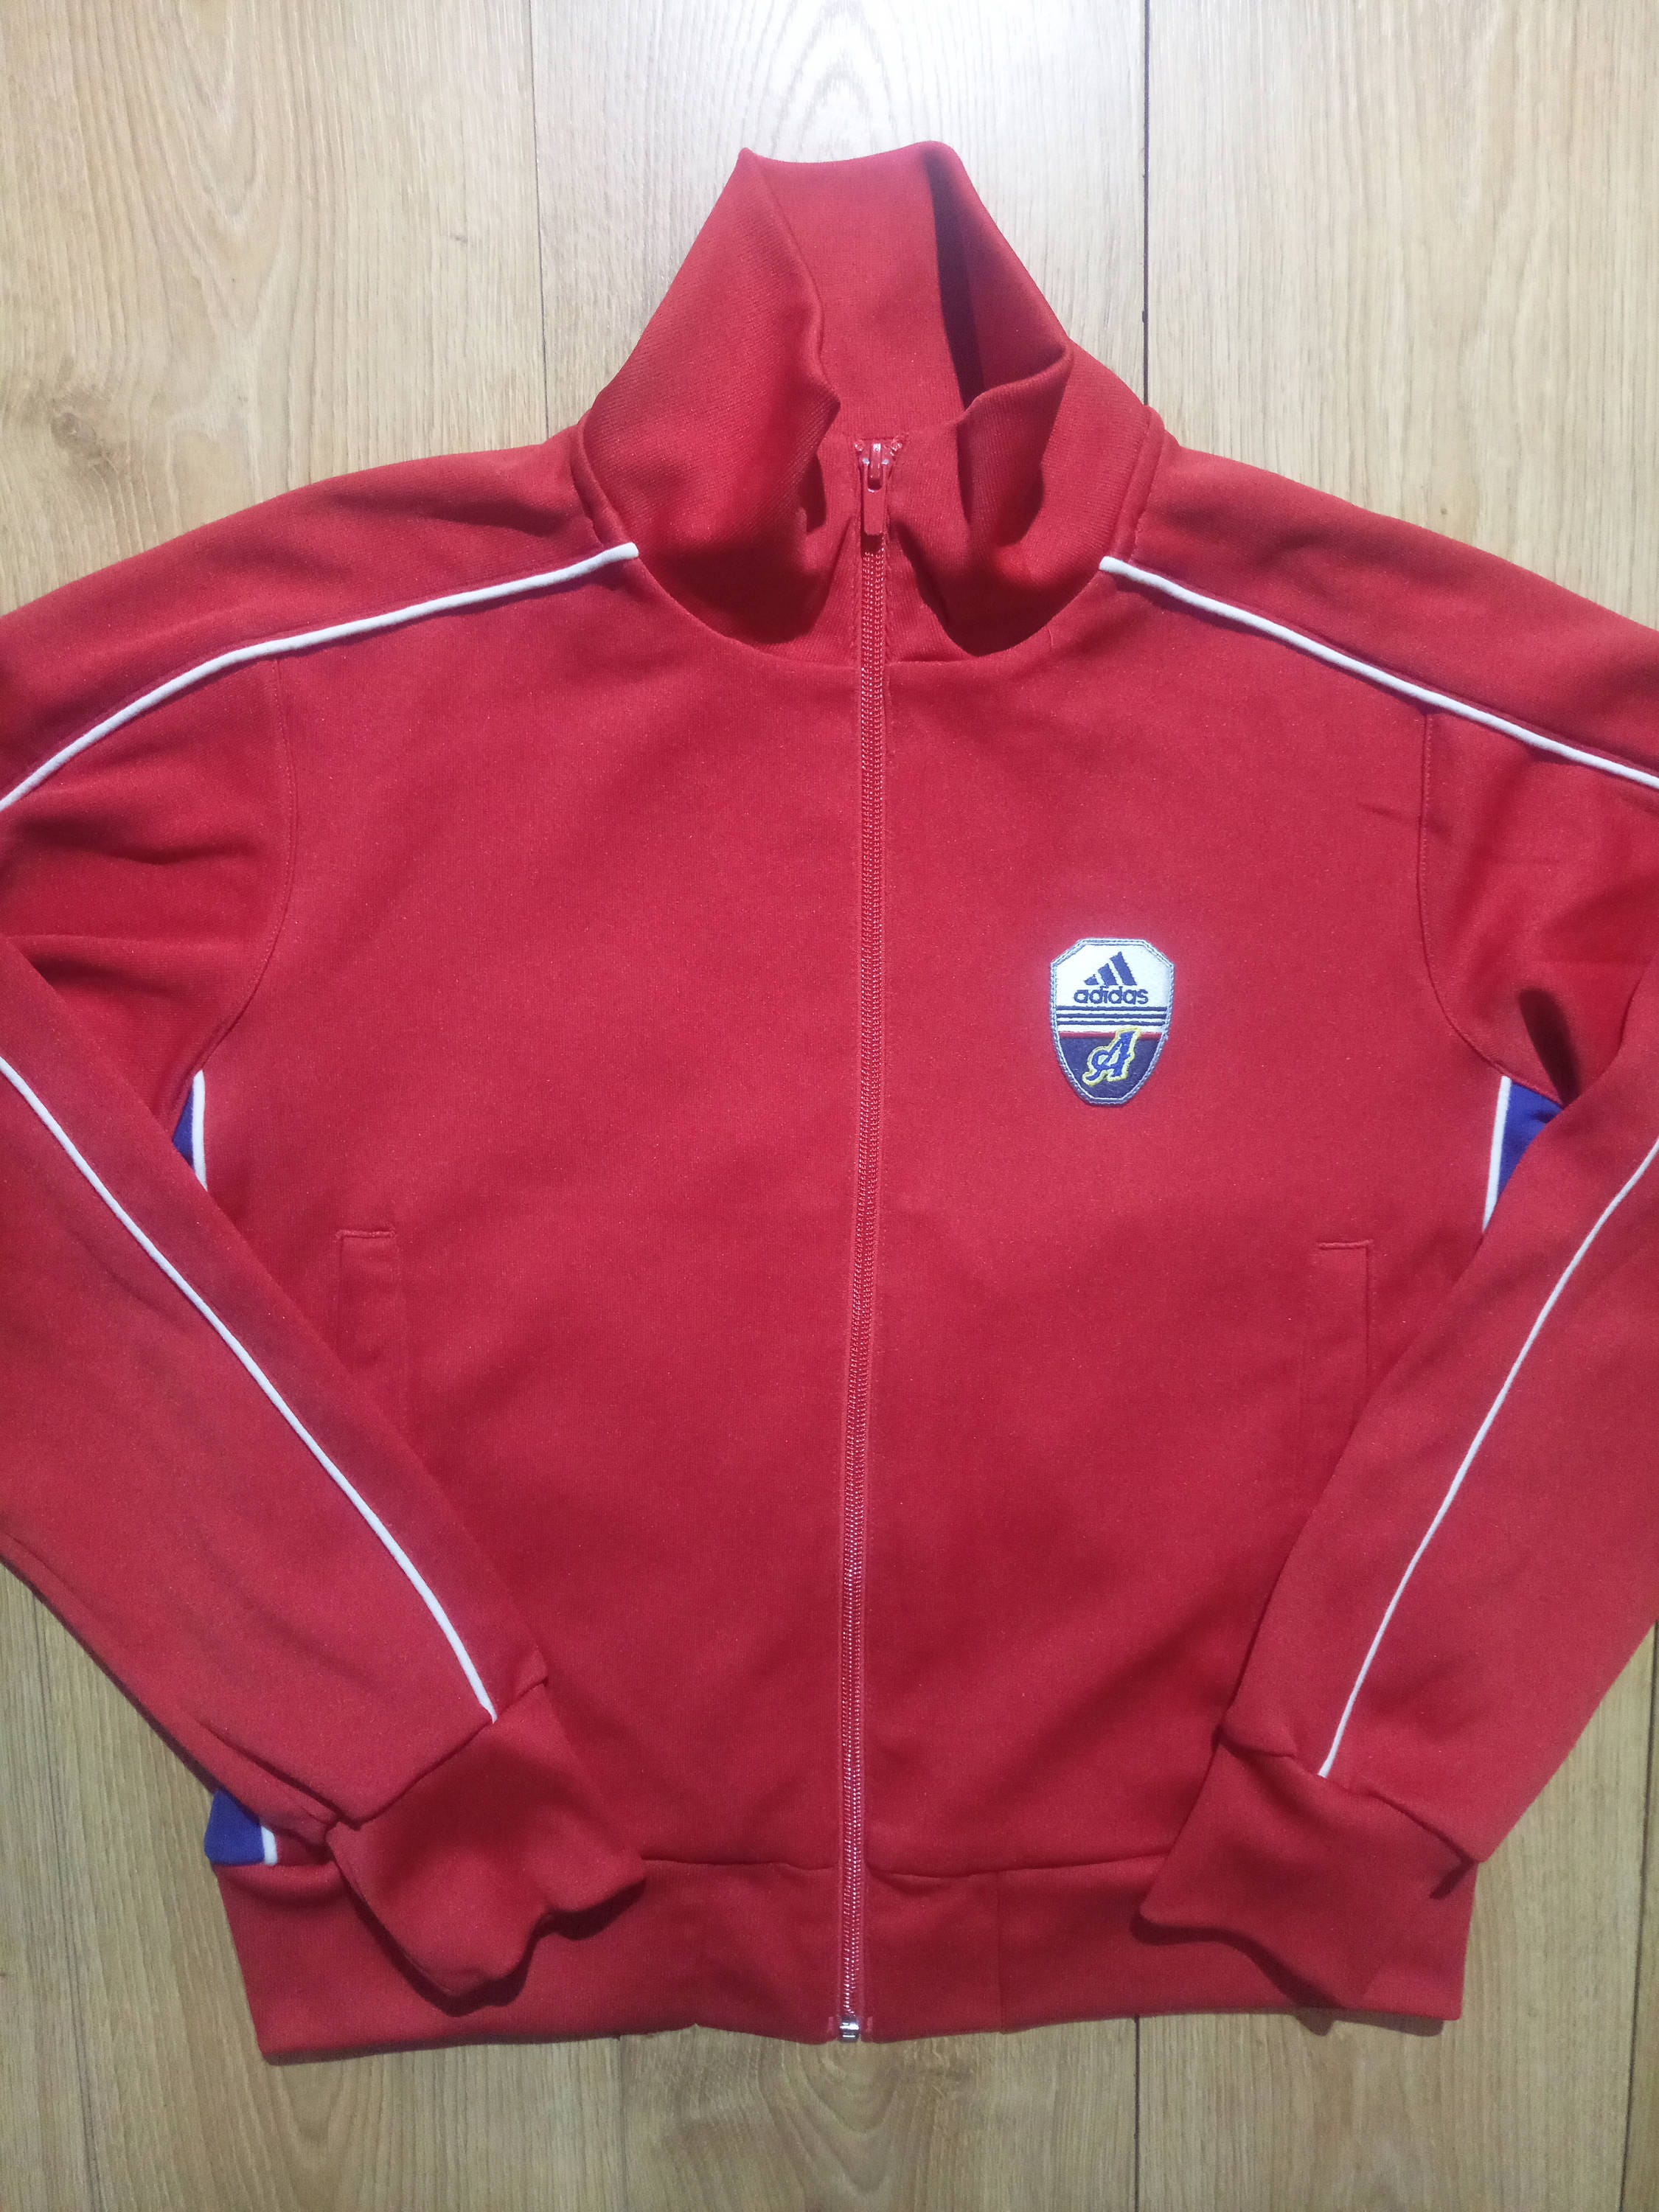 Adidas 90's Vintage Womens Tracksuit Top Jacket Red | Etsy